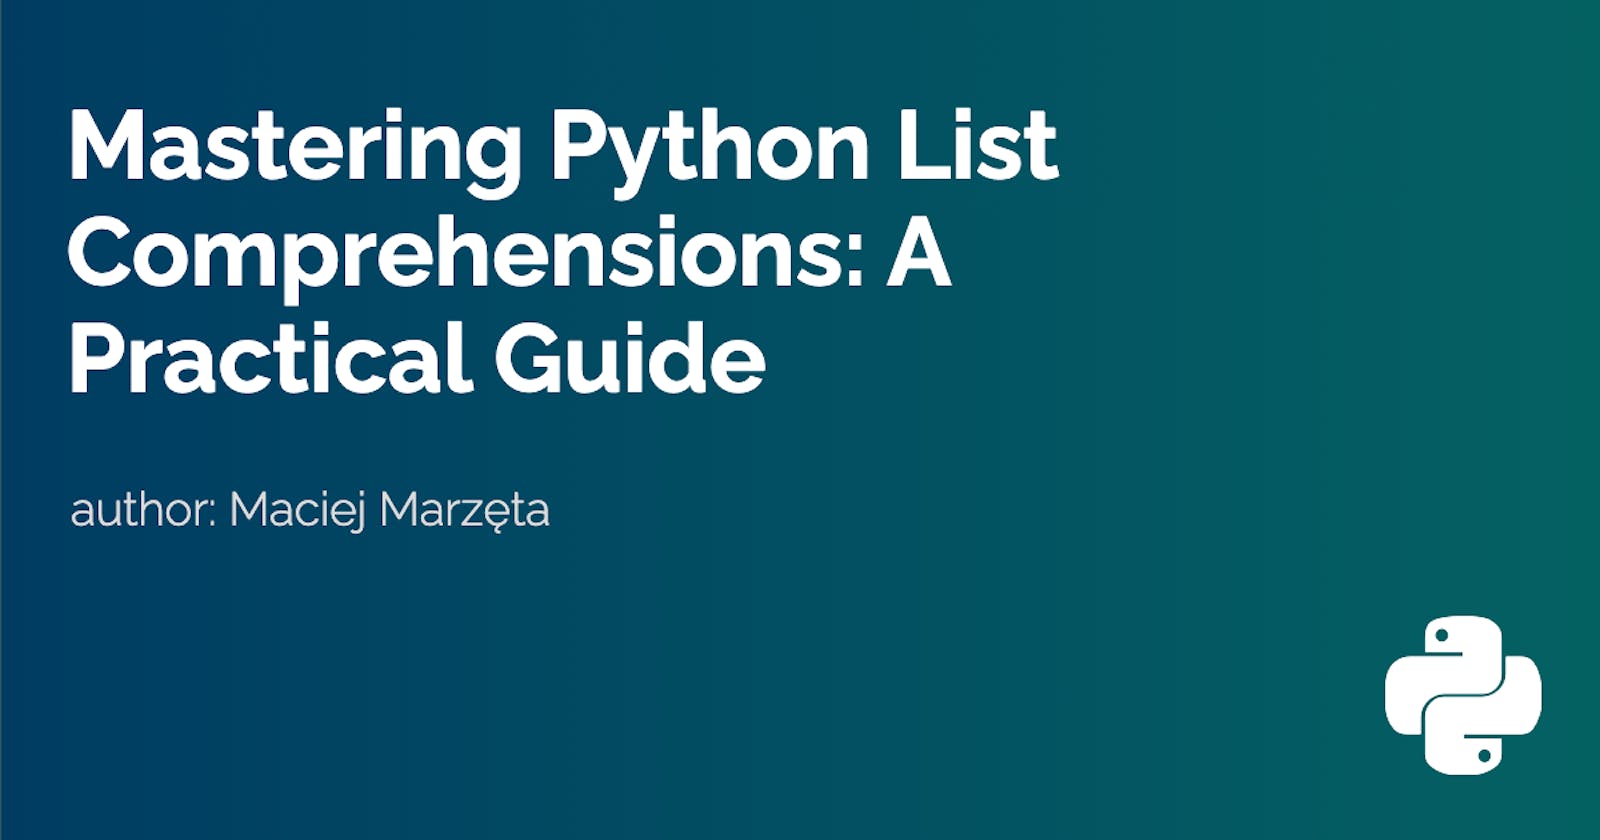 Mastering Python List Comprehensions: A Practical Guide